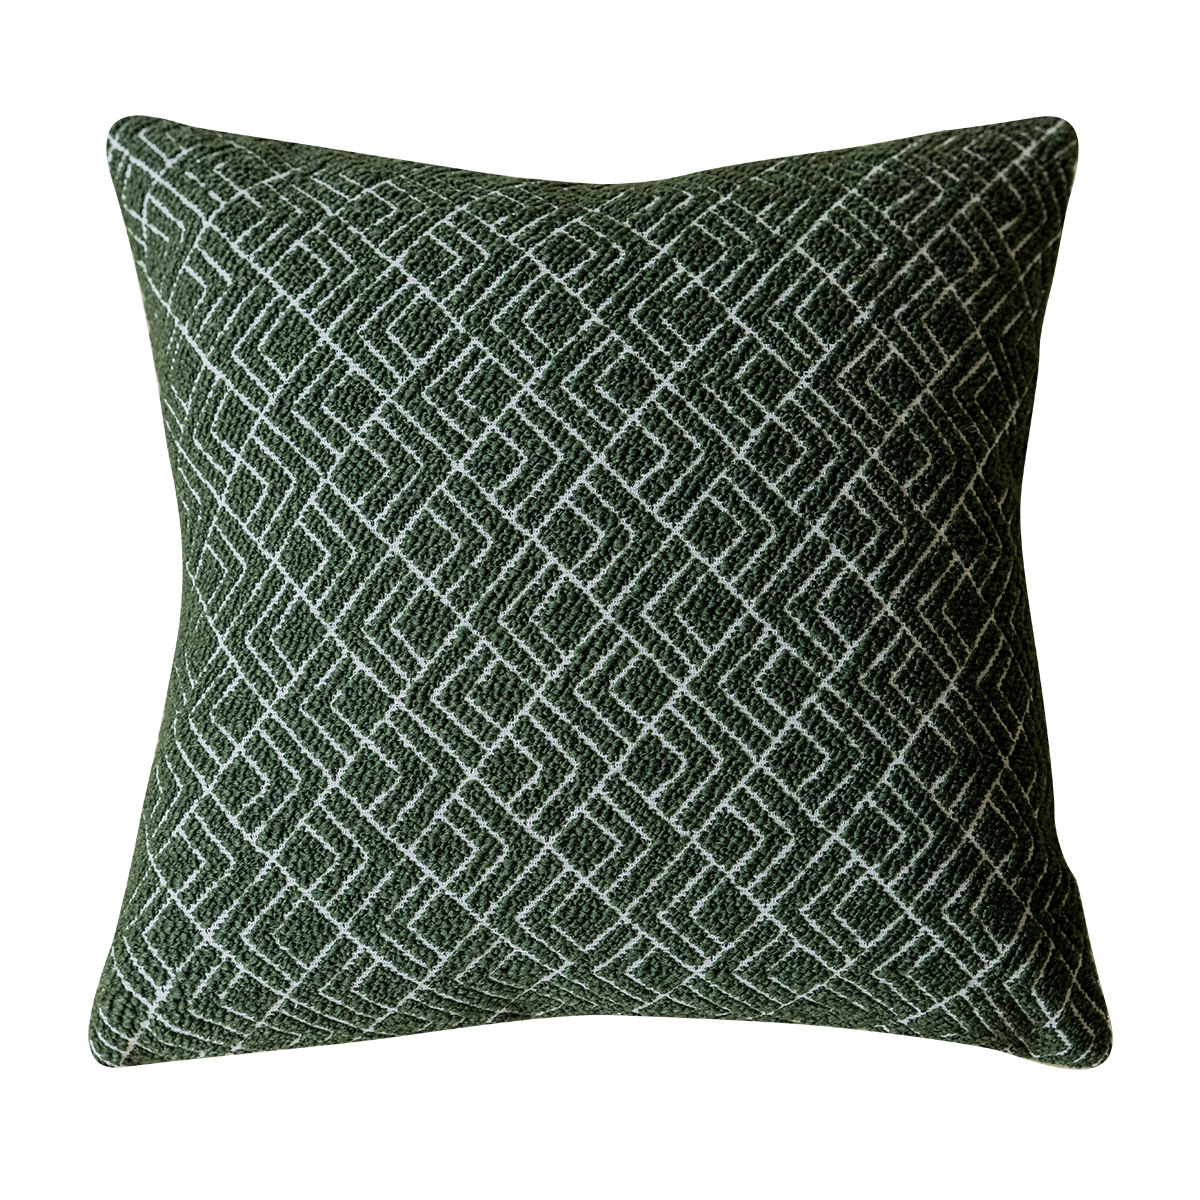 French Vintage Sofa Cushion Cover - Modern and Minimalist Style for Model Rooms, Living Rooms, and Bed Backrests